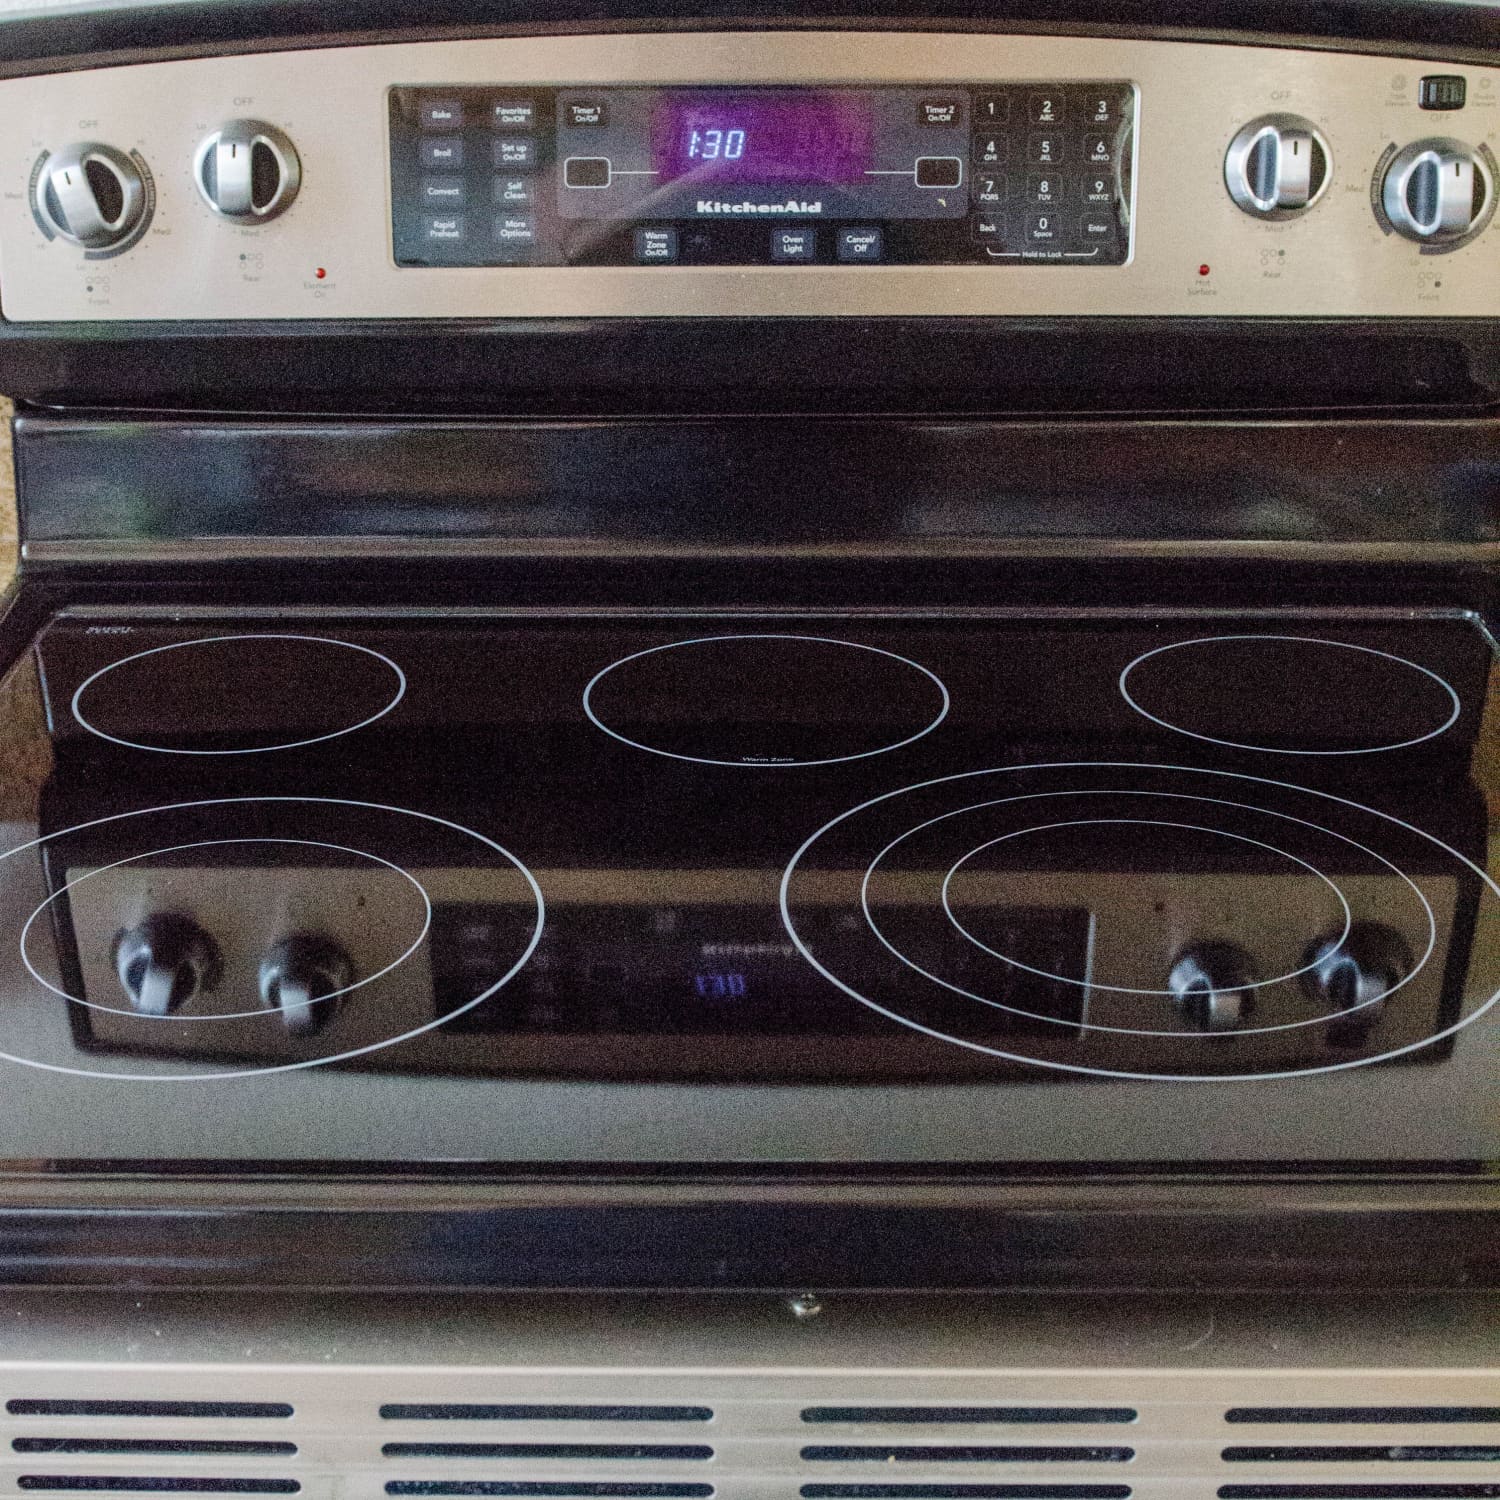 8 Easiest Ways To Clean Electric Stove Burners